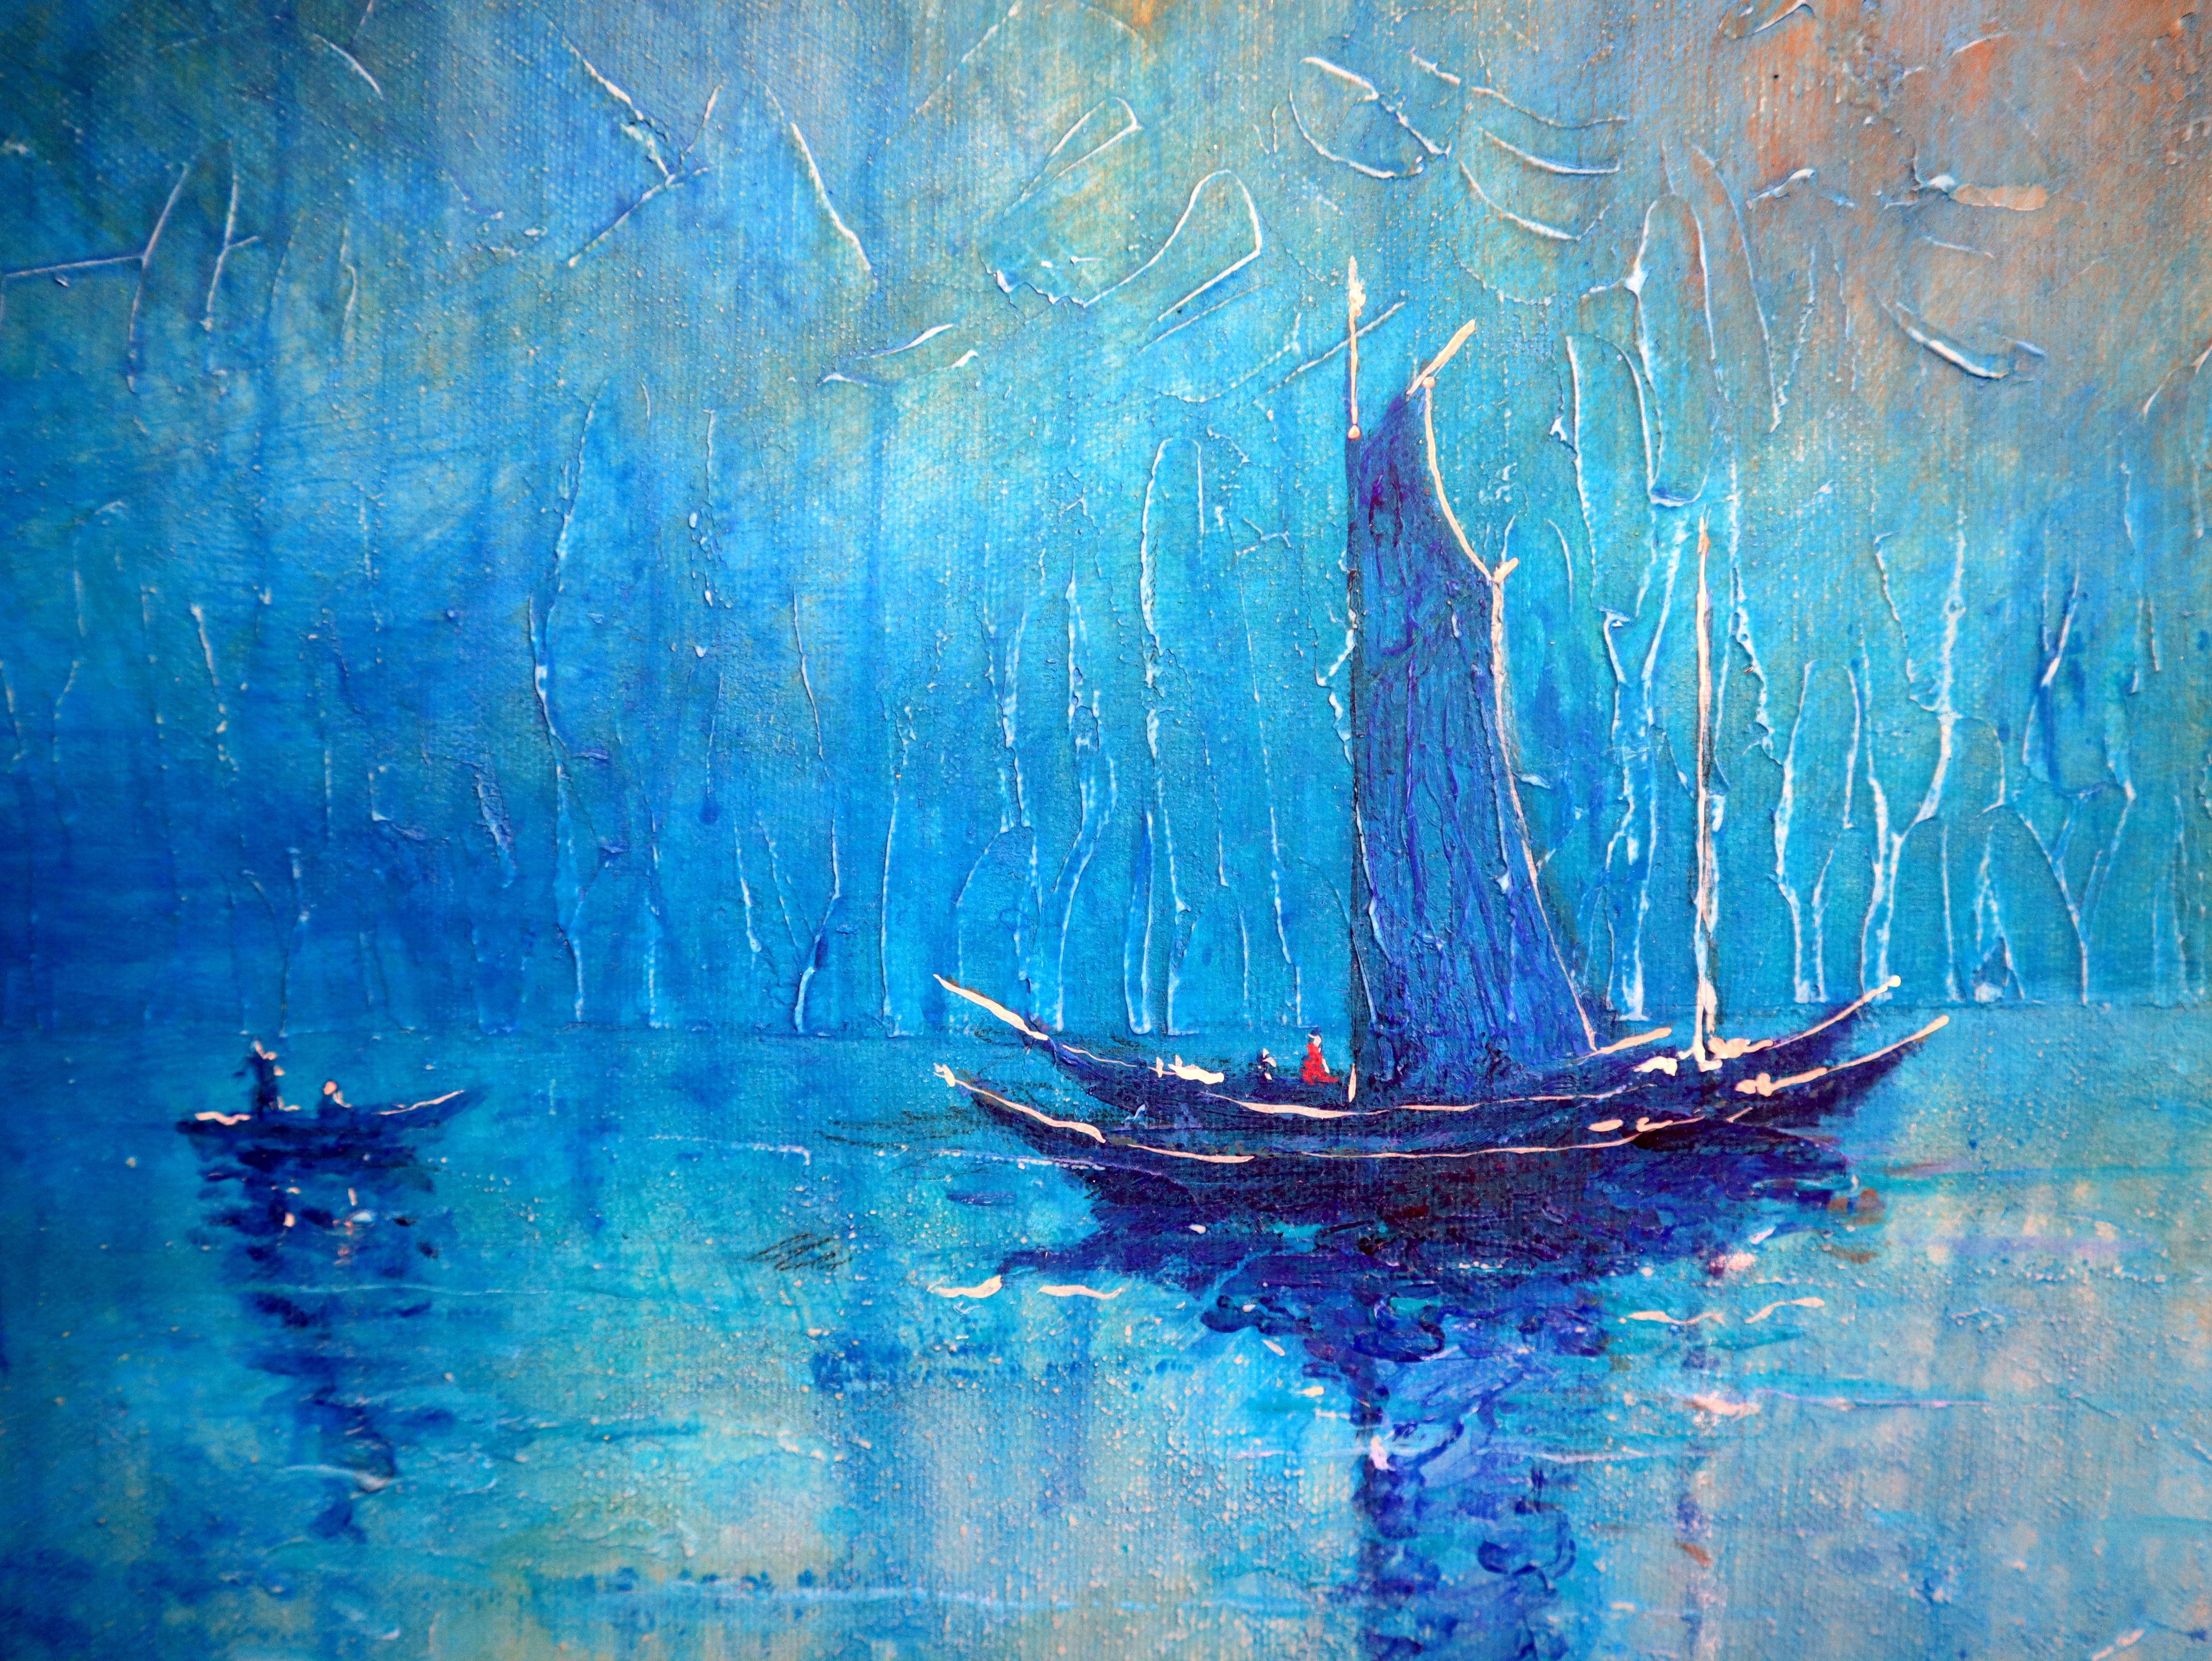 In this painting, I explored the synergy between light and water, capturing a moment of serene beauty. I used acrylics and oils to create depth and texture, imbuing the canvas with the tranquil blues of the sea and the warmth of a setting sun. My